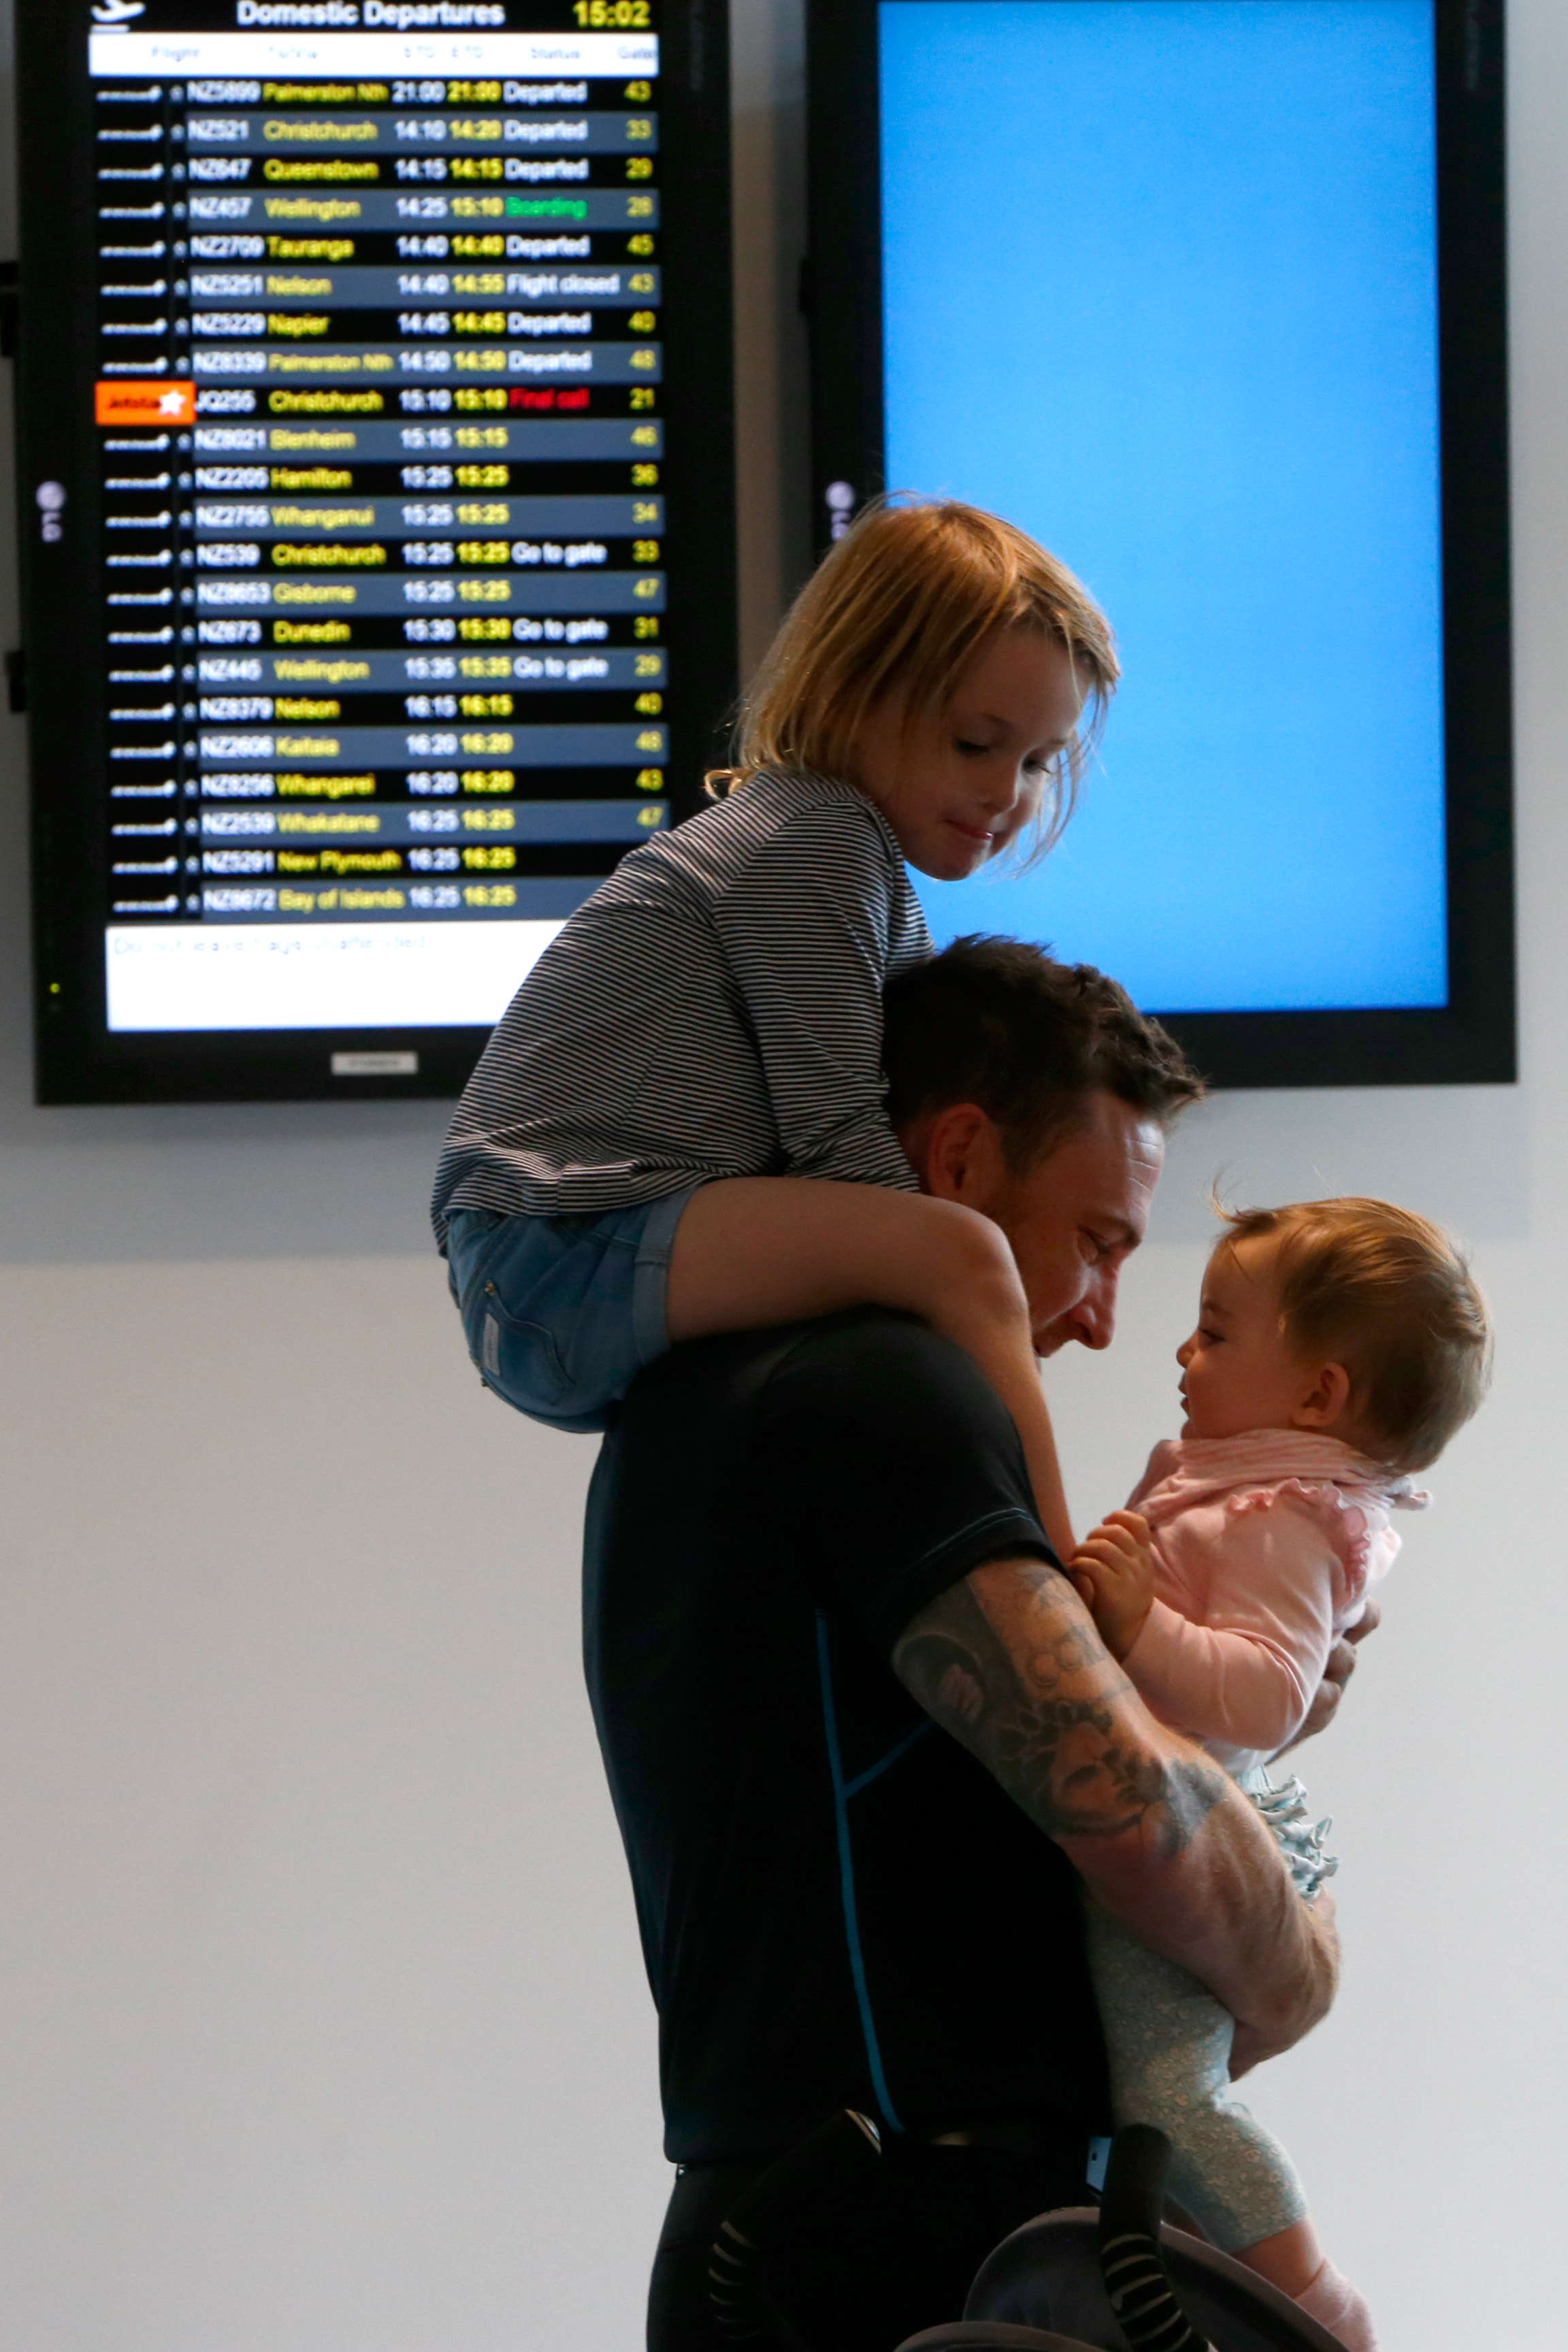 McCullum with his kids after returning home from the World Cup final defeat to Australia in Melbourne last year (Picture courtesy: Getty Images)